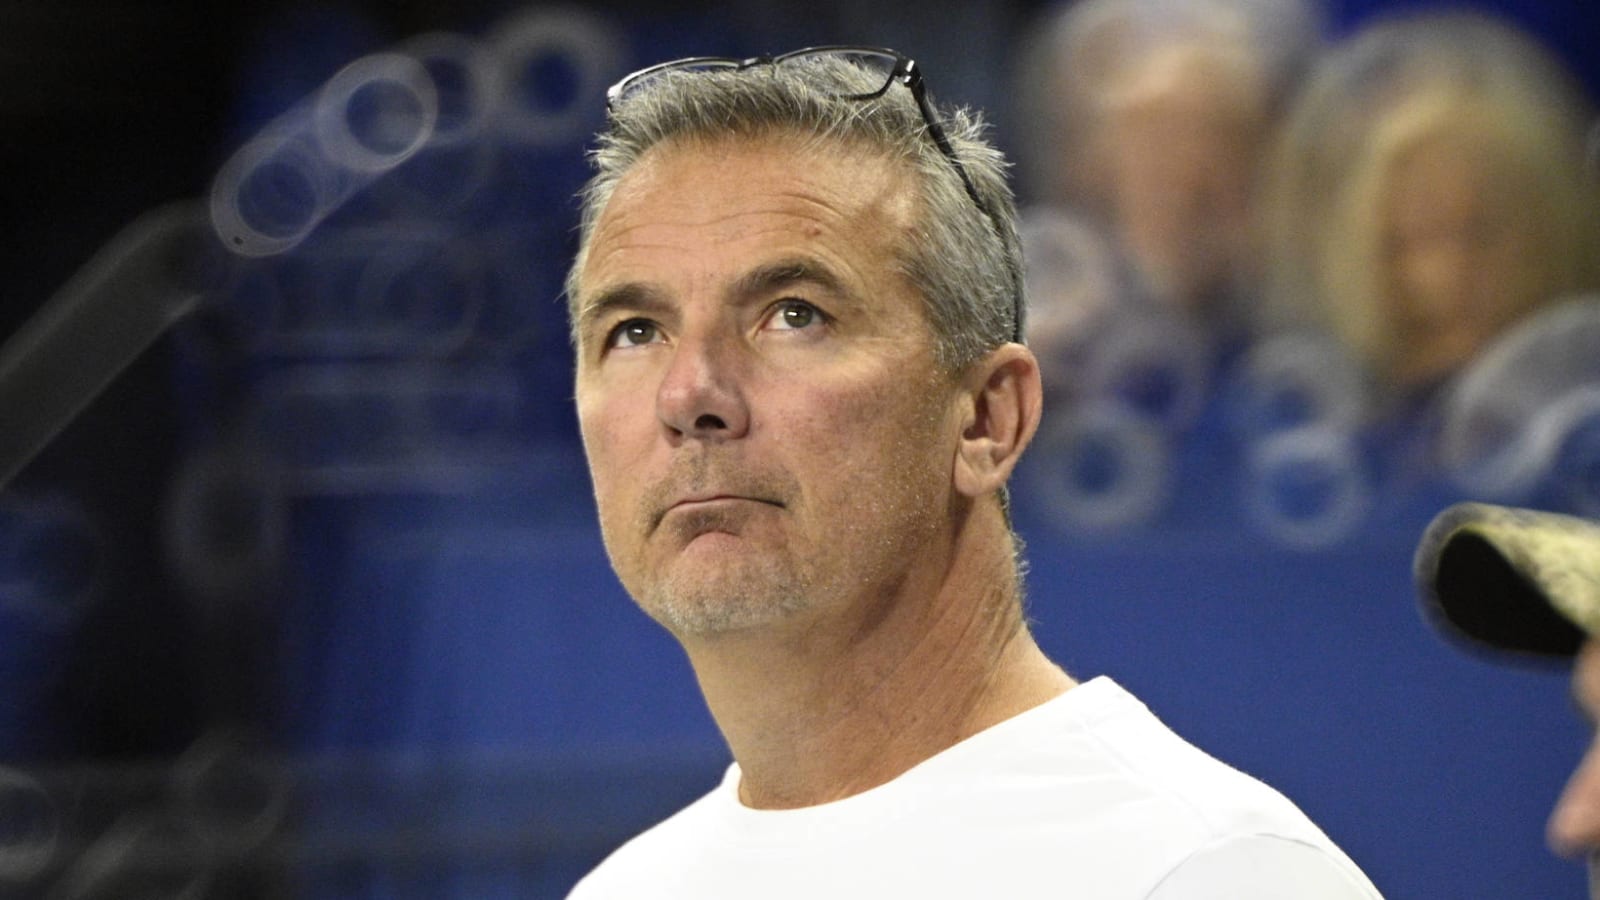 Urban Meyer not interested in Notre Dame, other college jobs